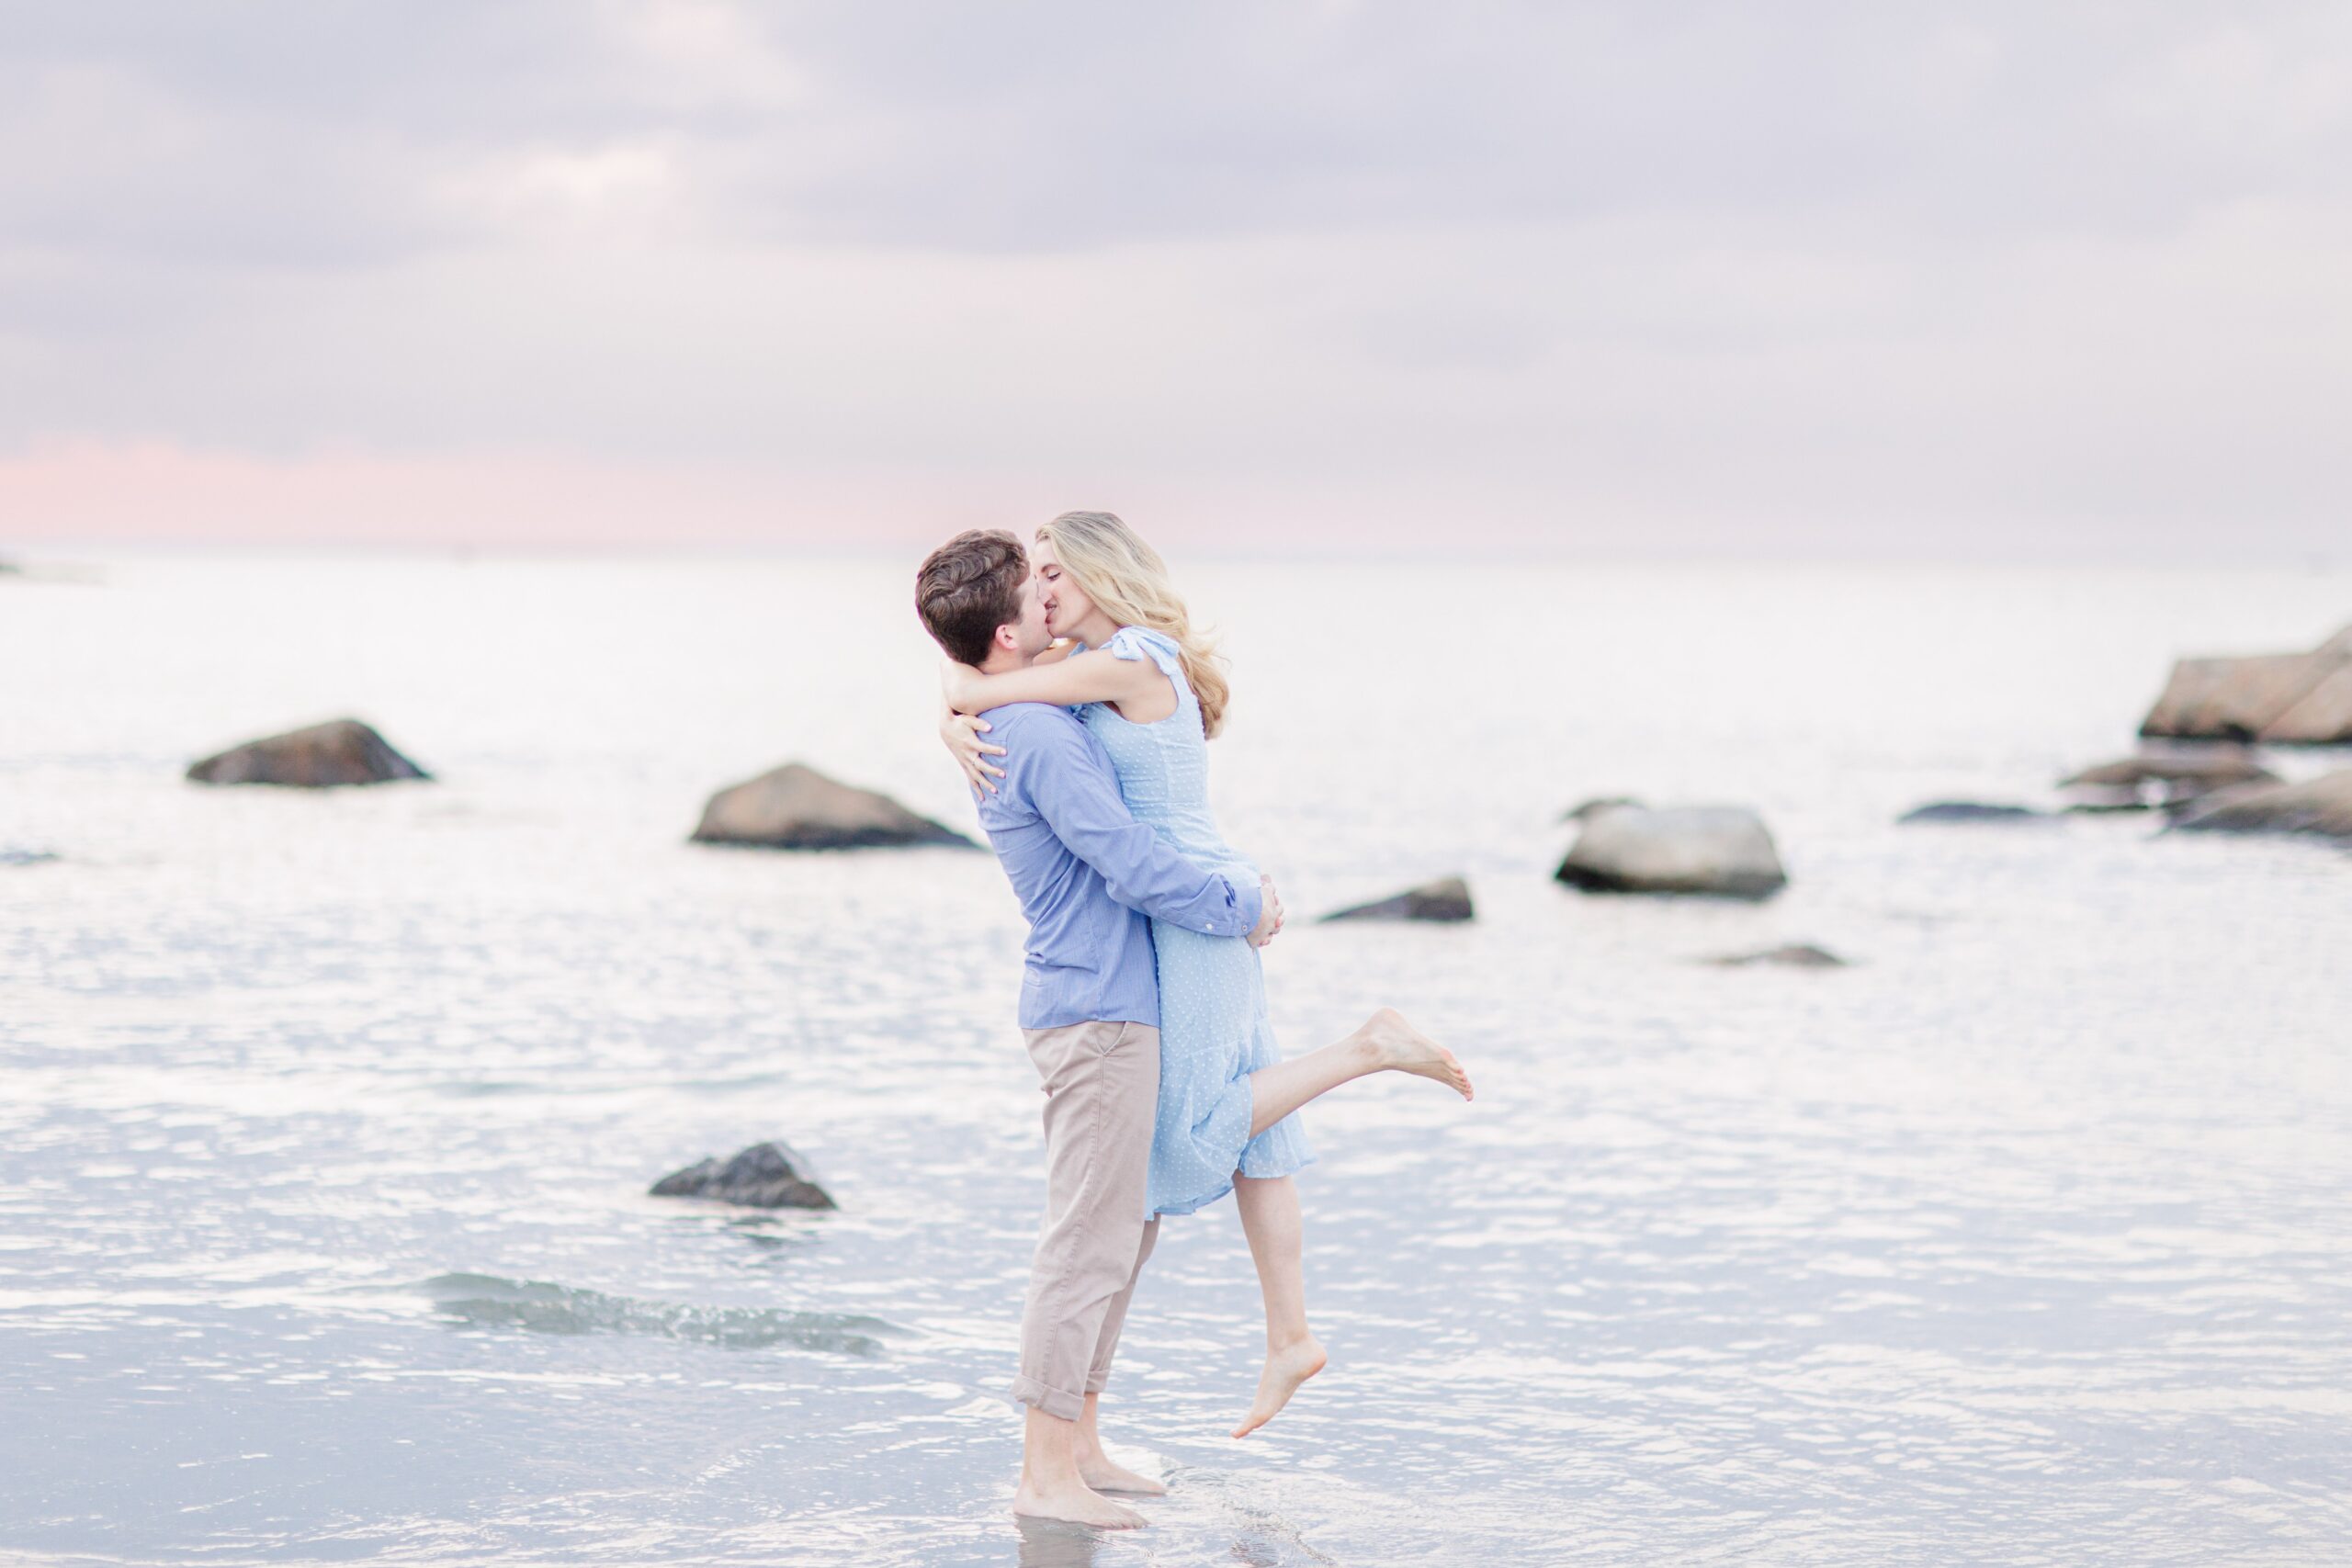 Man holding and kissing a woman at the beach in front of the sunset